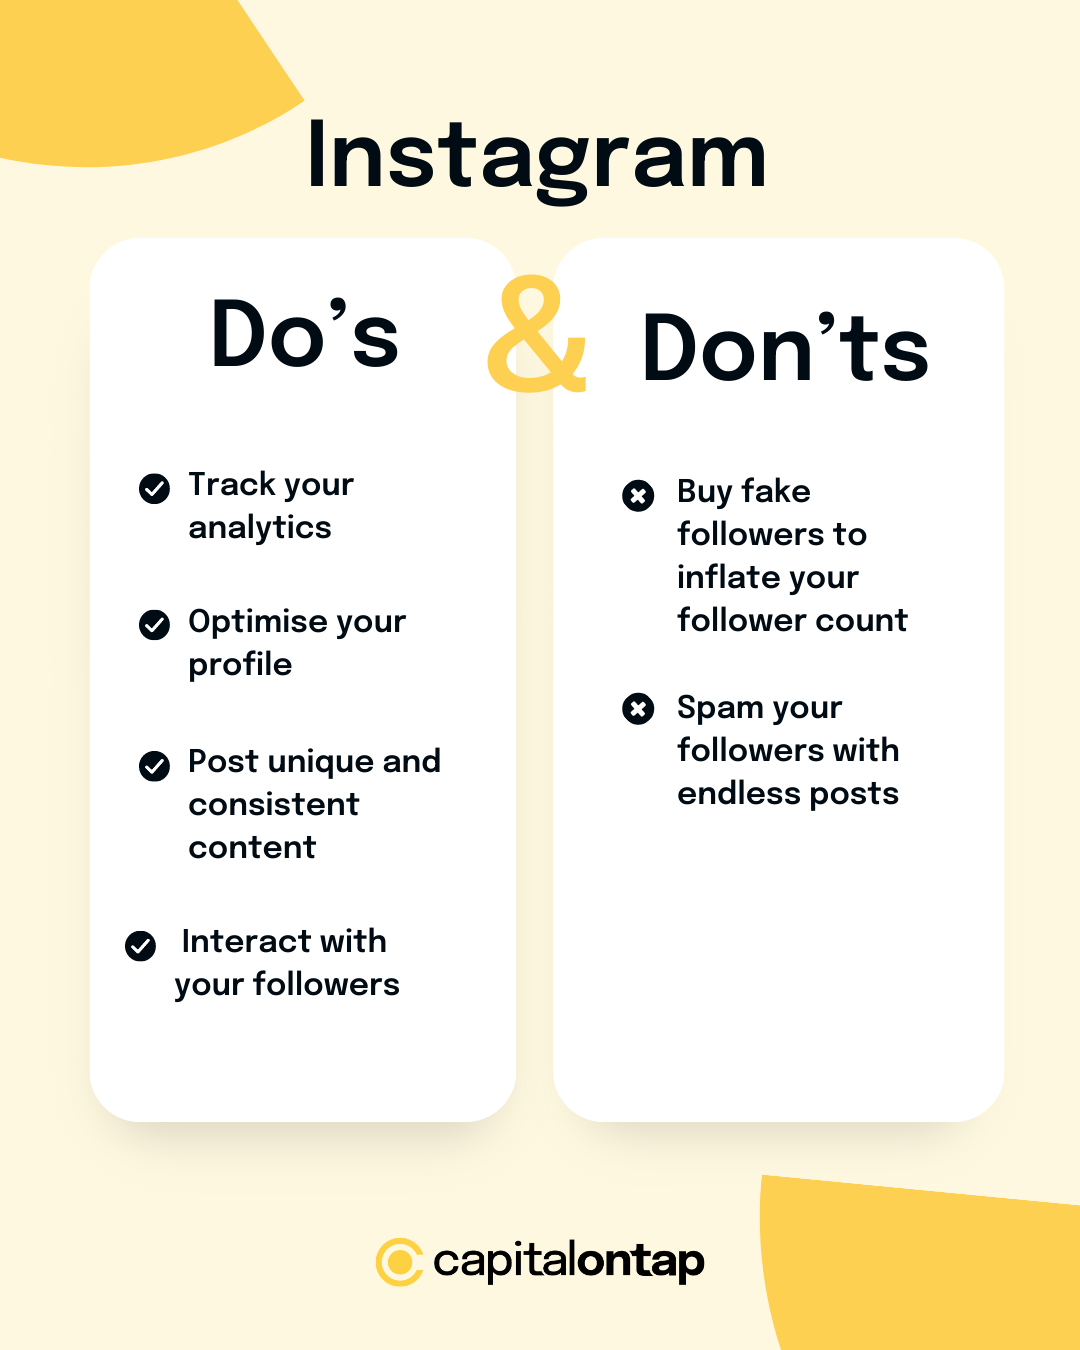 Two columns showing Instagram do's and don'ts. Do's read: Track your analytics, optimise your profile, post unique and consistent content; interact with your followers. Don'ts read: Buy fake followers to inflate your follower count; spam your followers with endless posts.